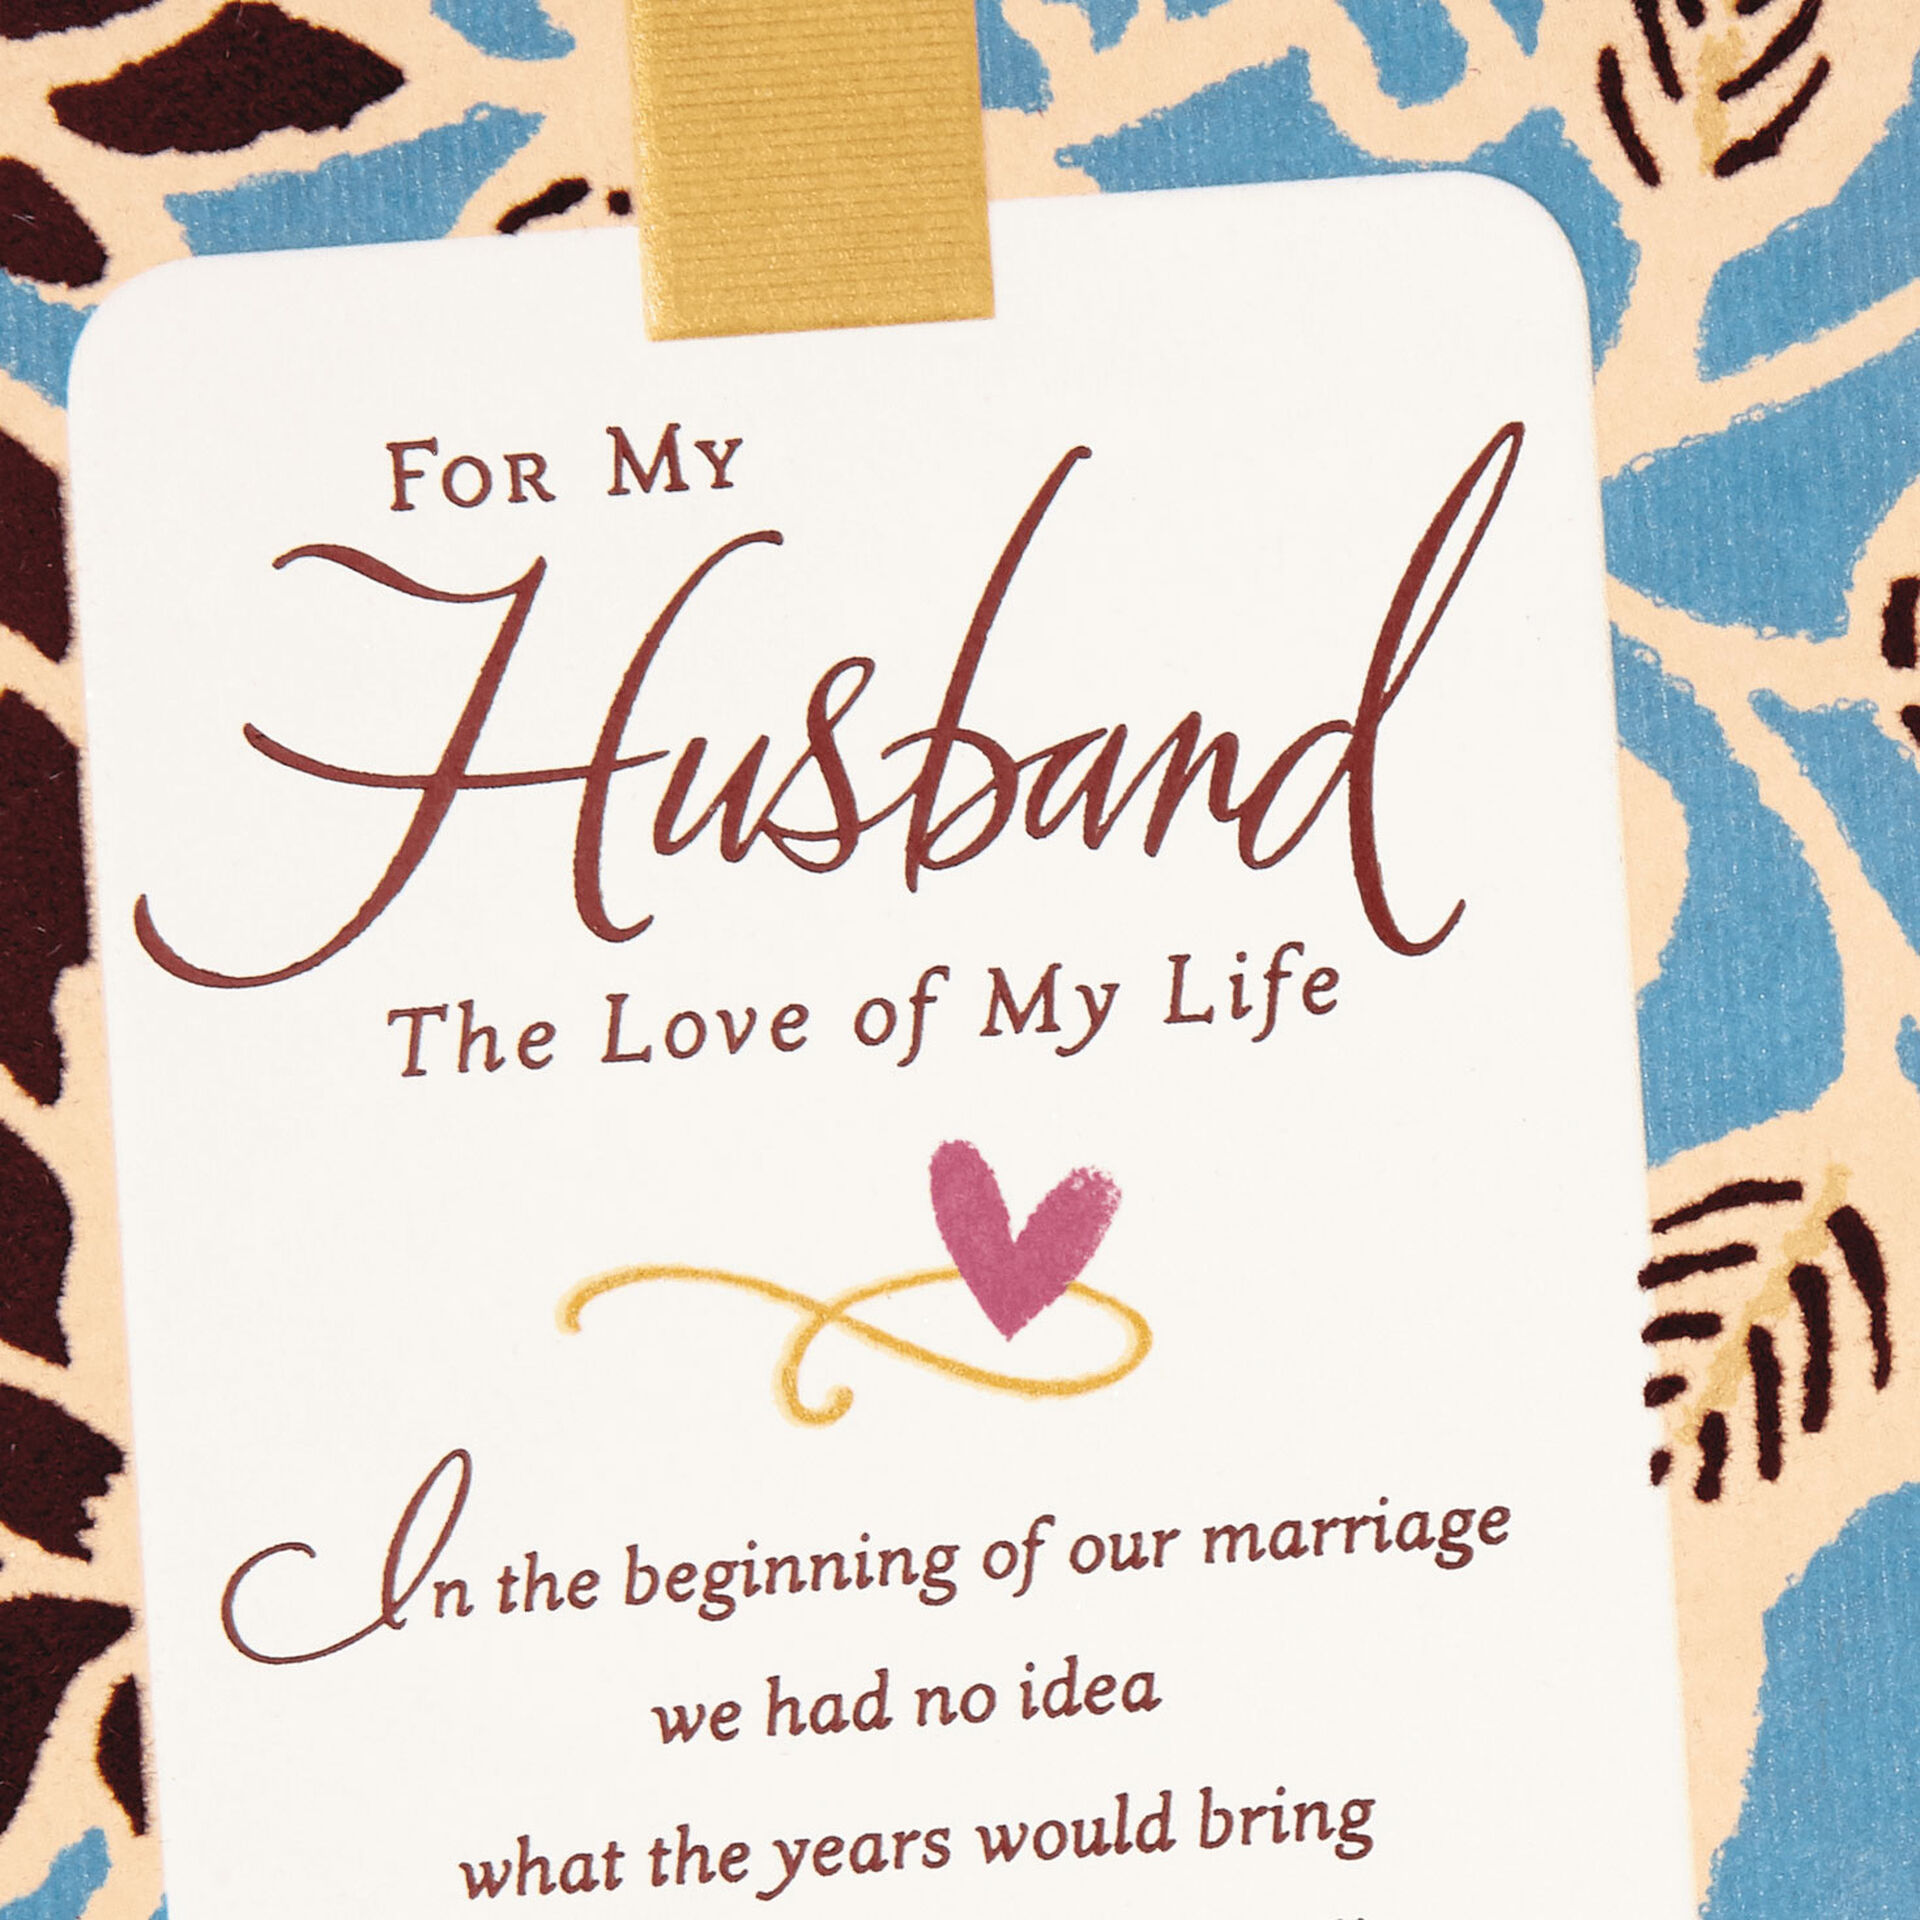 love-of-my-life-religious-anniversary-card-for-husband-greeting-cards